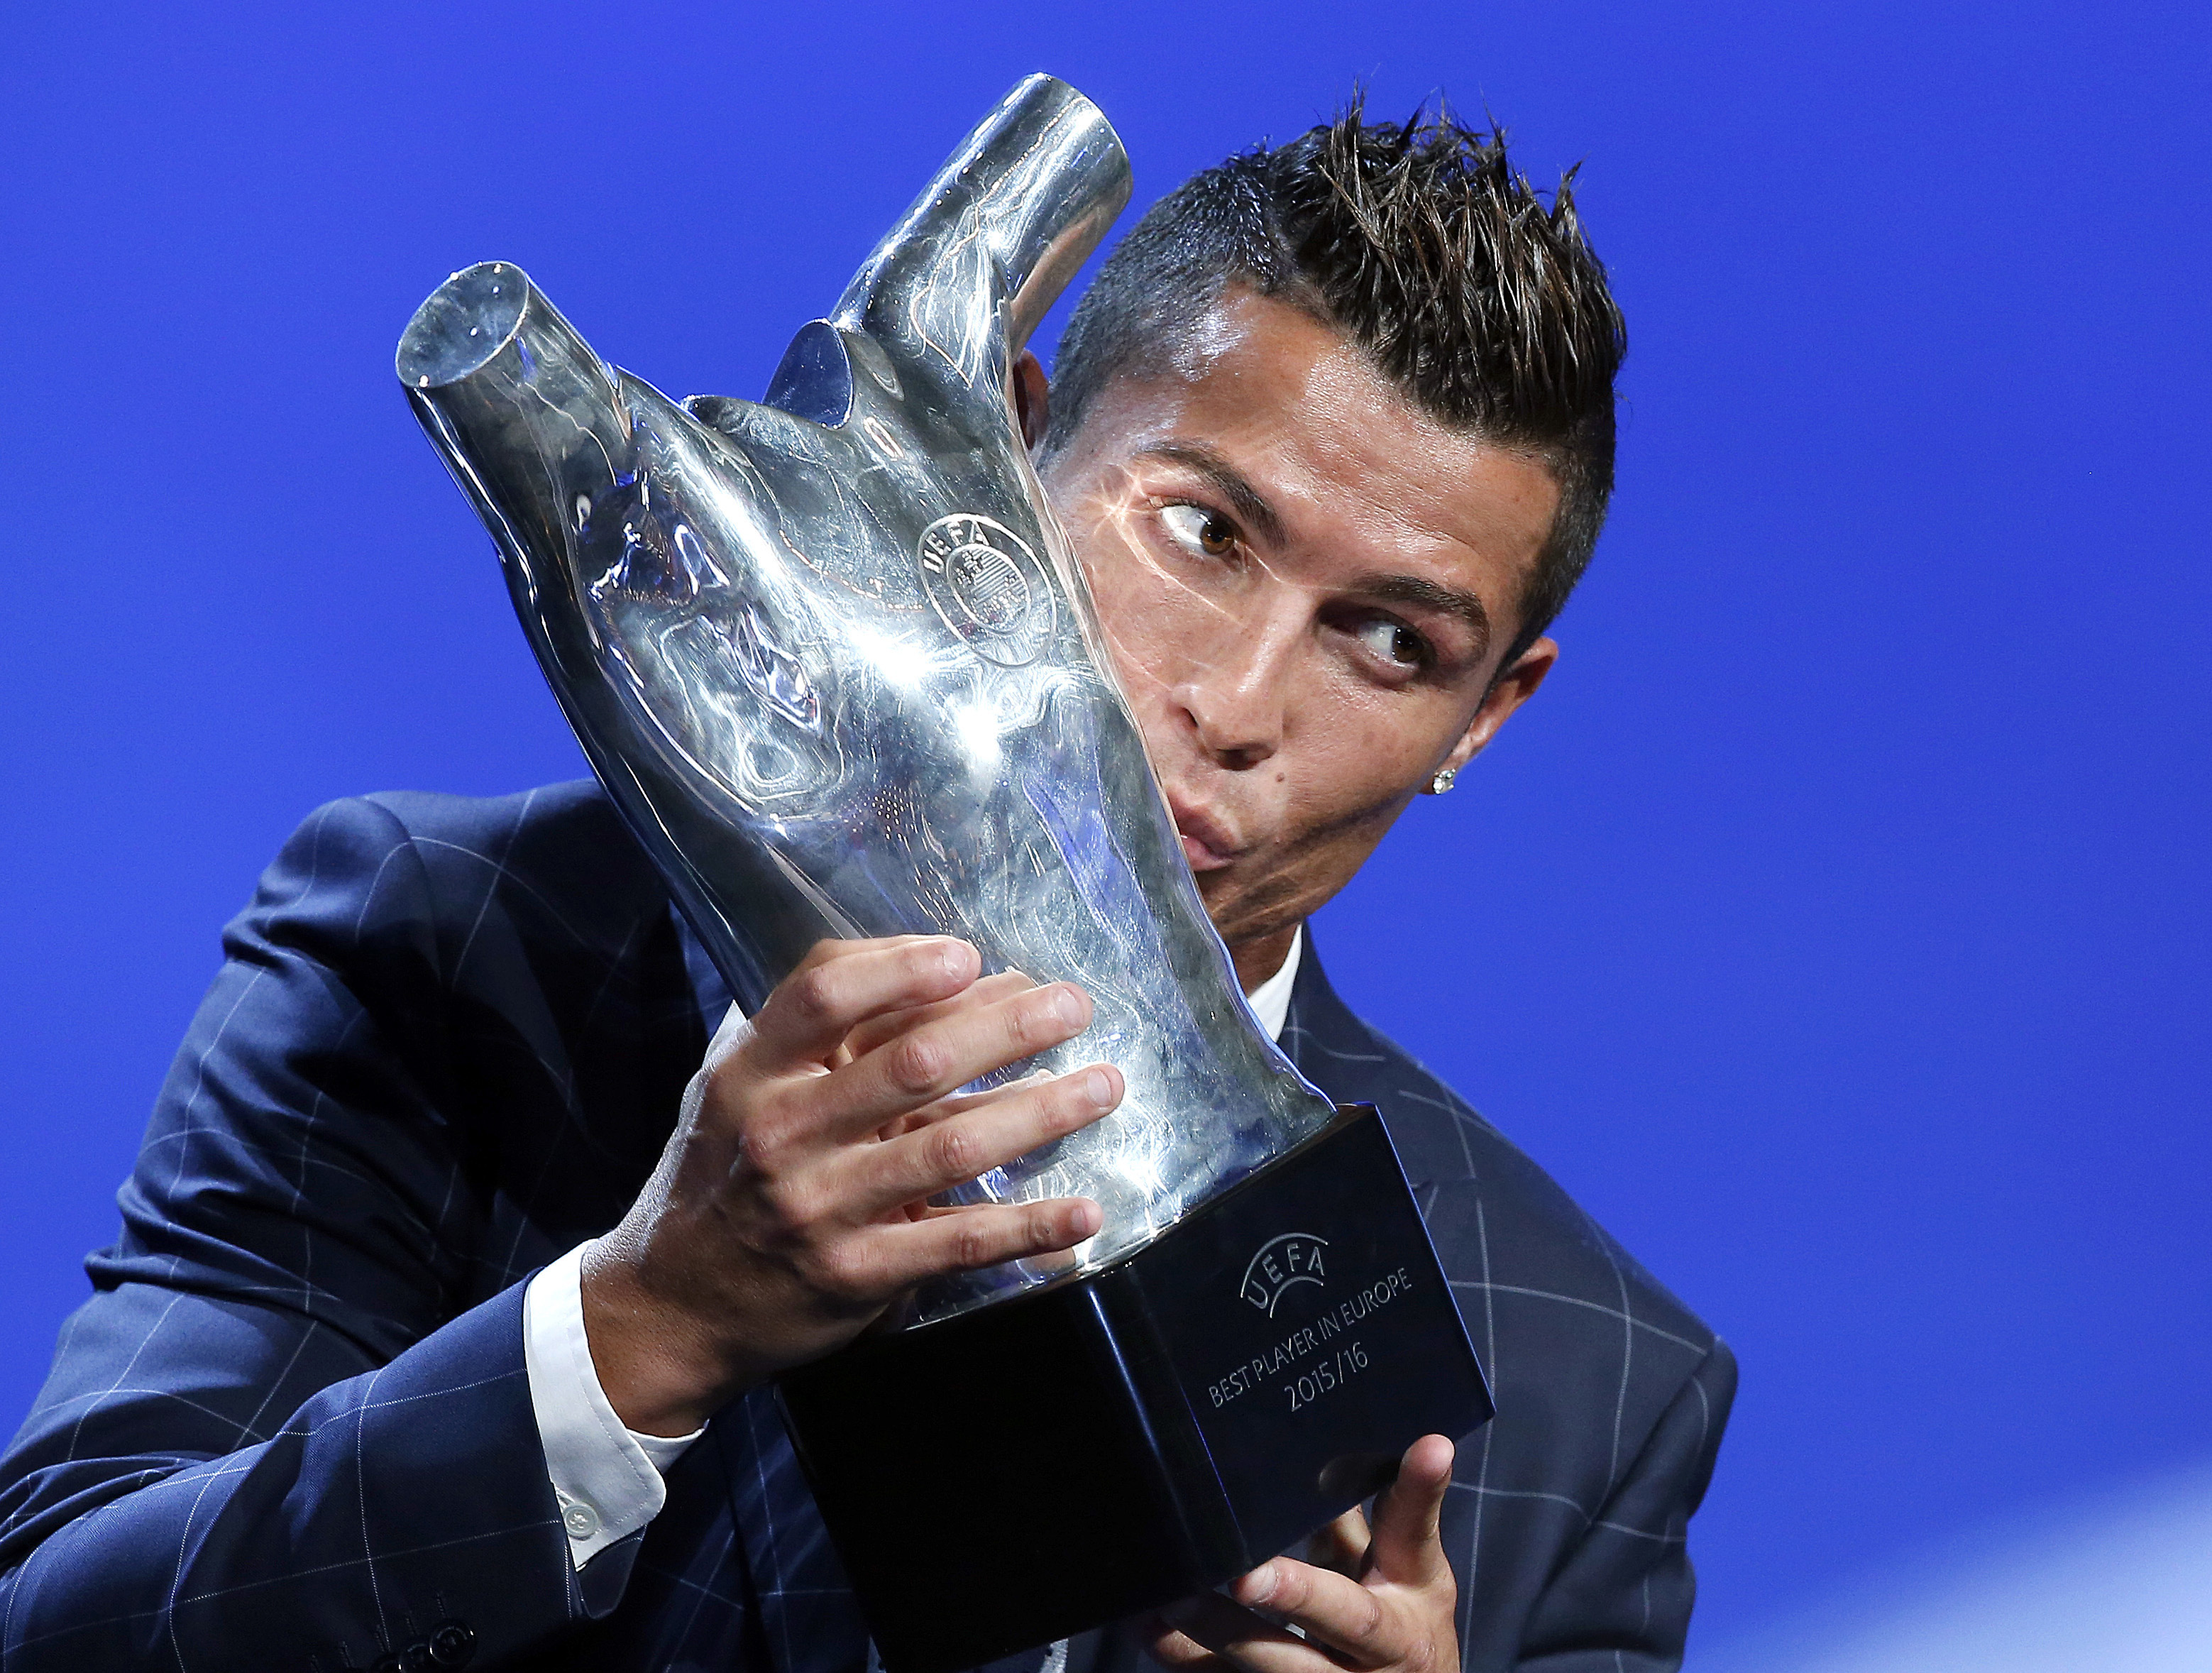 Real Madrid's forward Cristiano Ronaldo of Portugal, kisses his trophy after winning the best player of the year award, during the UEFA Champions League draw, at the Grimaldi Forum, in Monaco, Thursday, August 25, 2016. Photo: AP